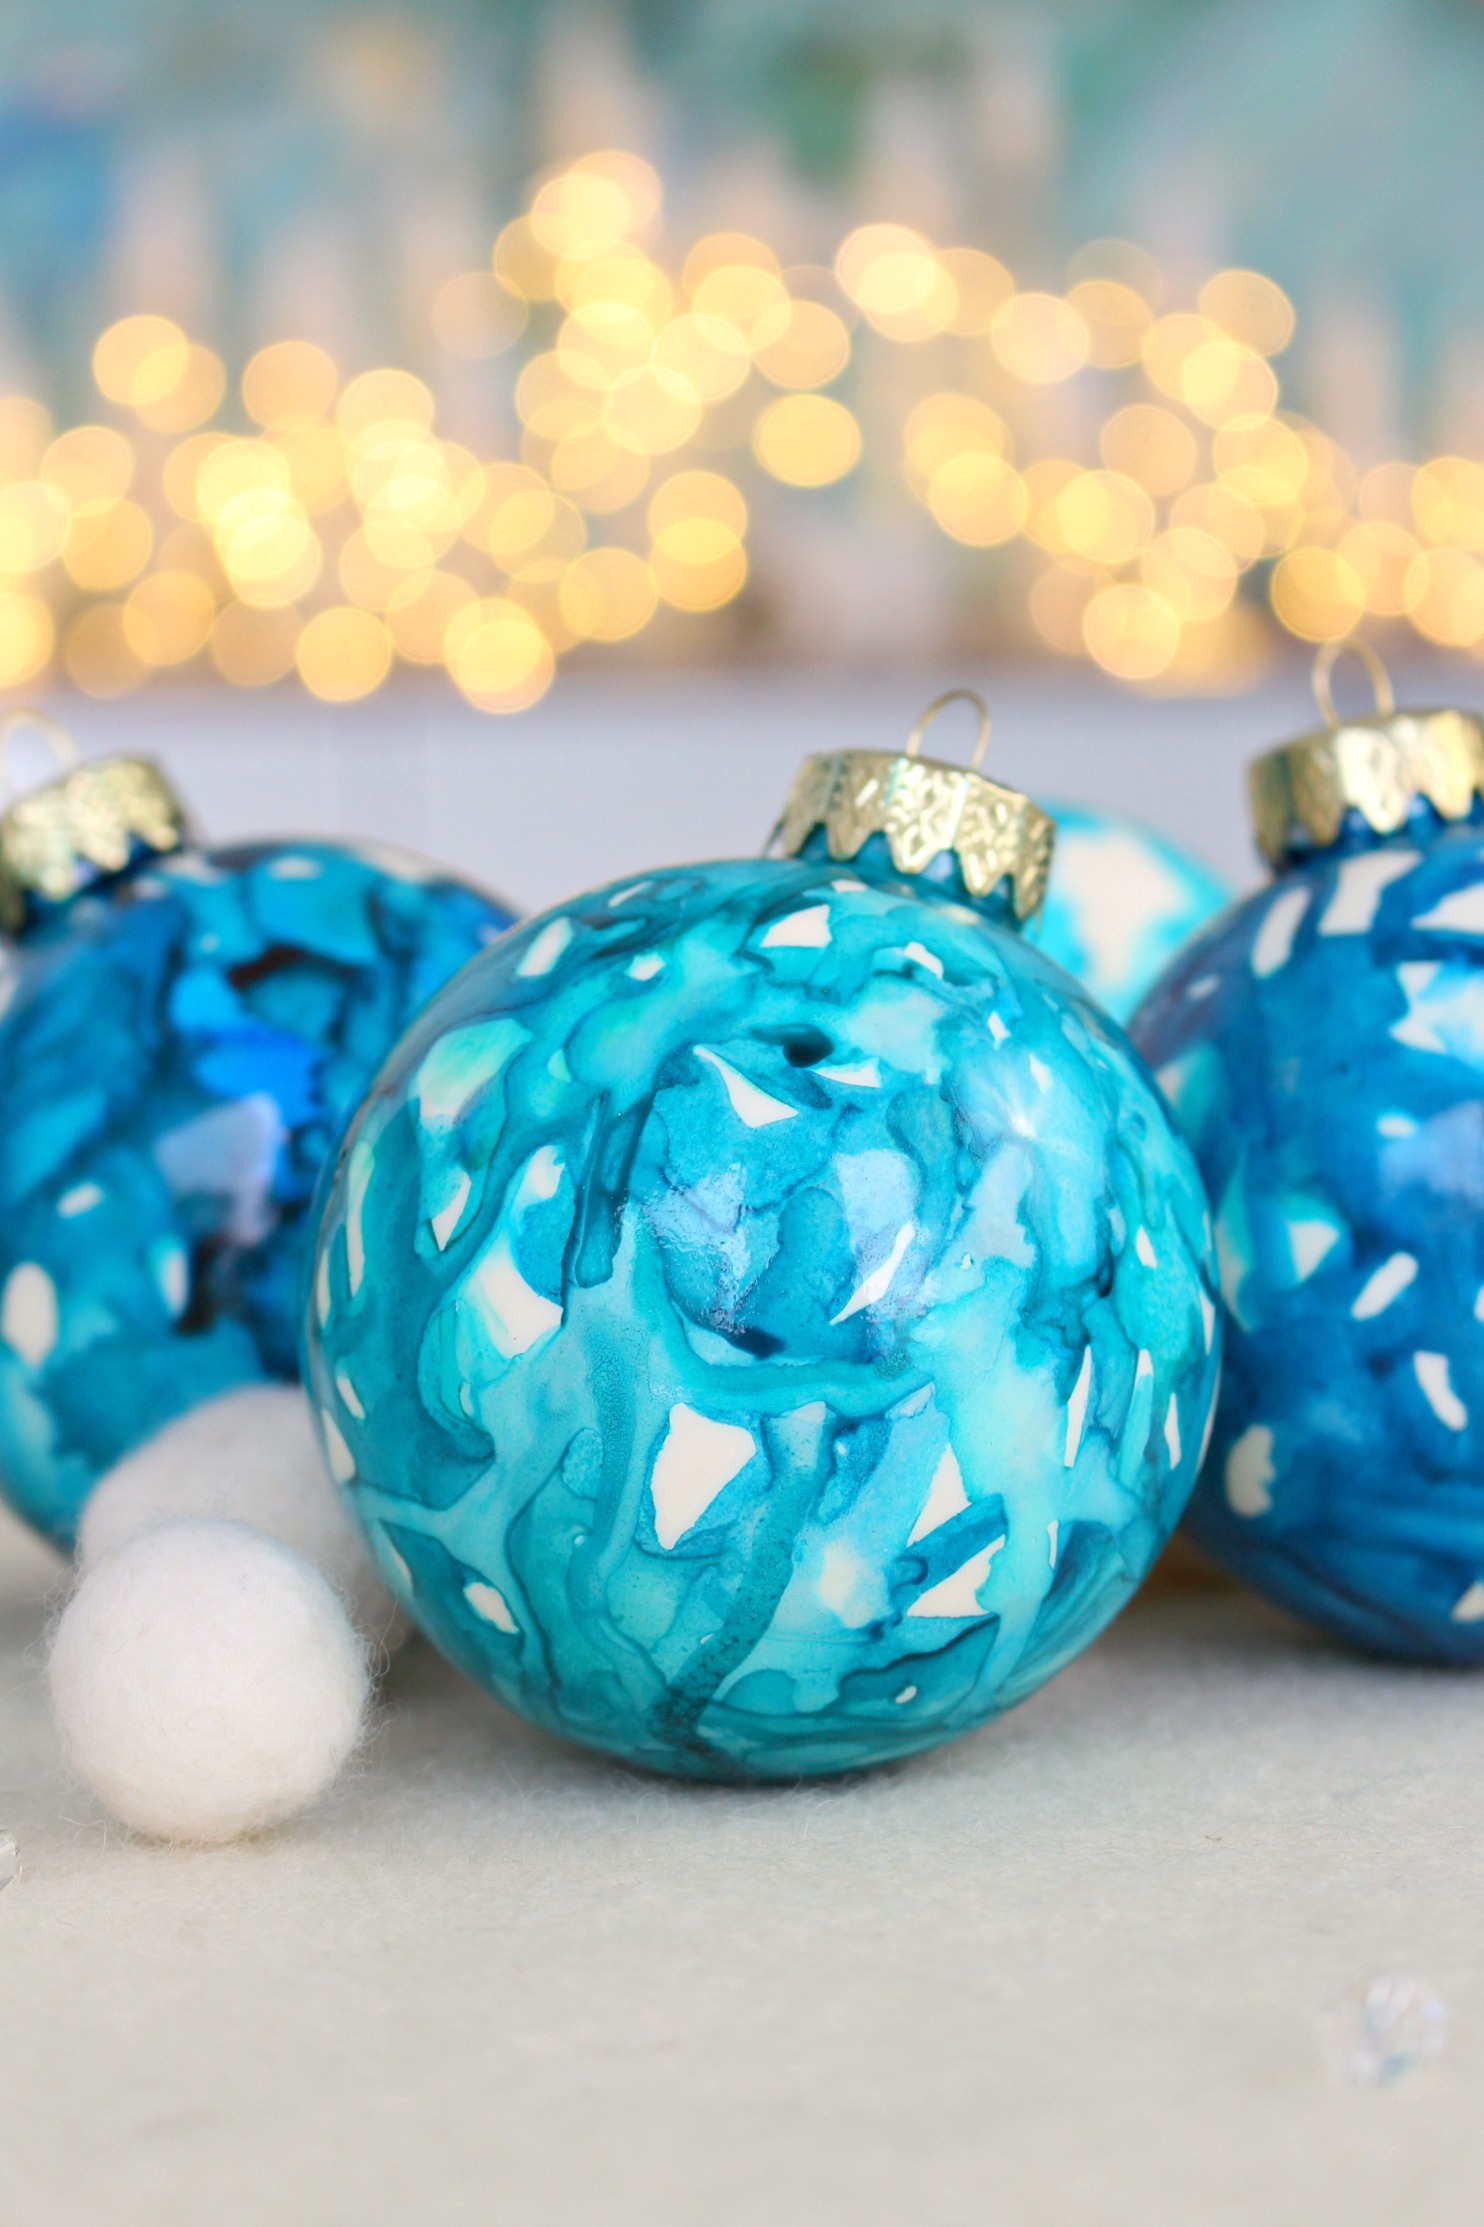 How to Paint Christmas Tree Ornaments